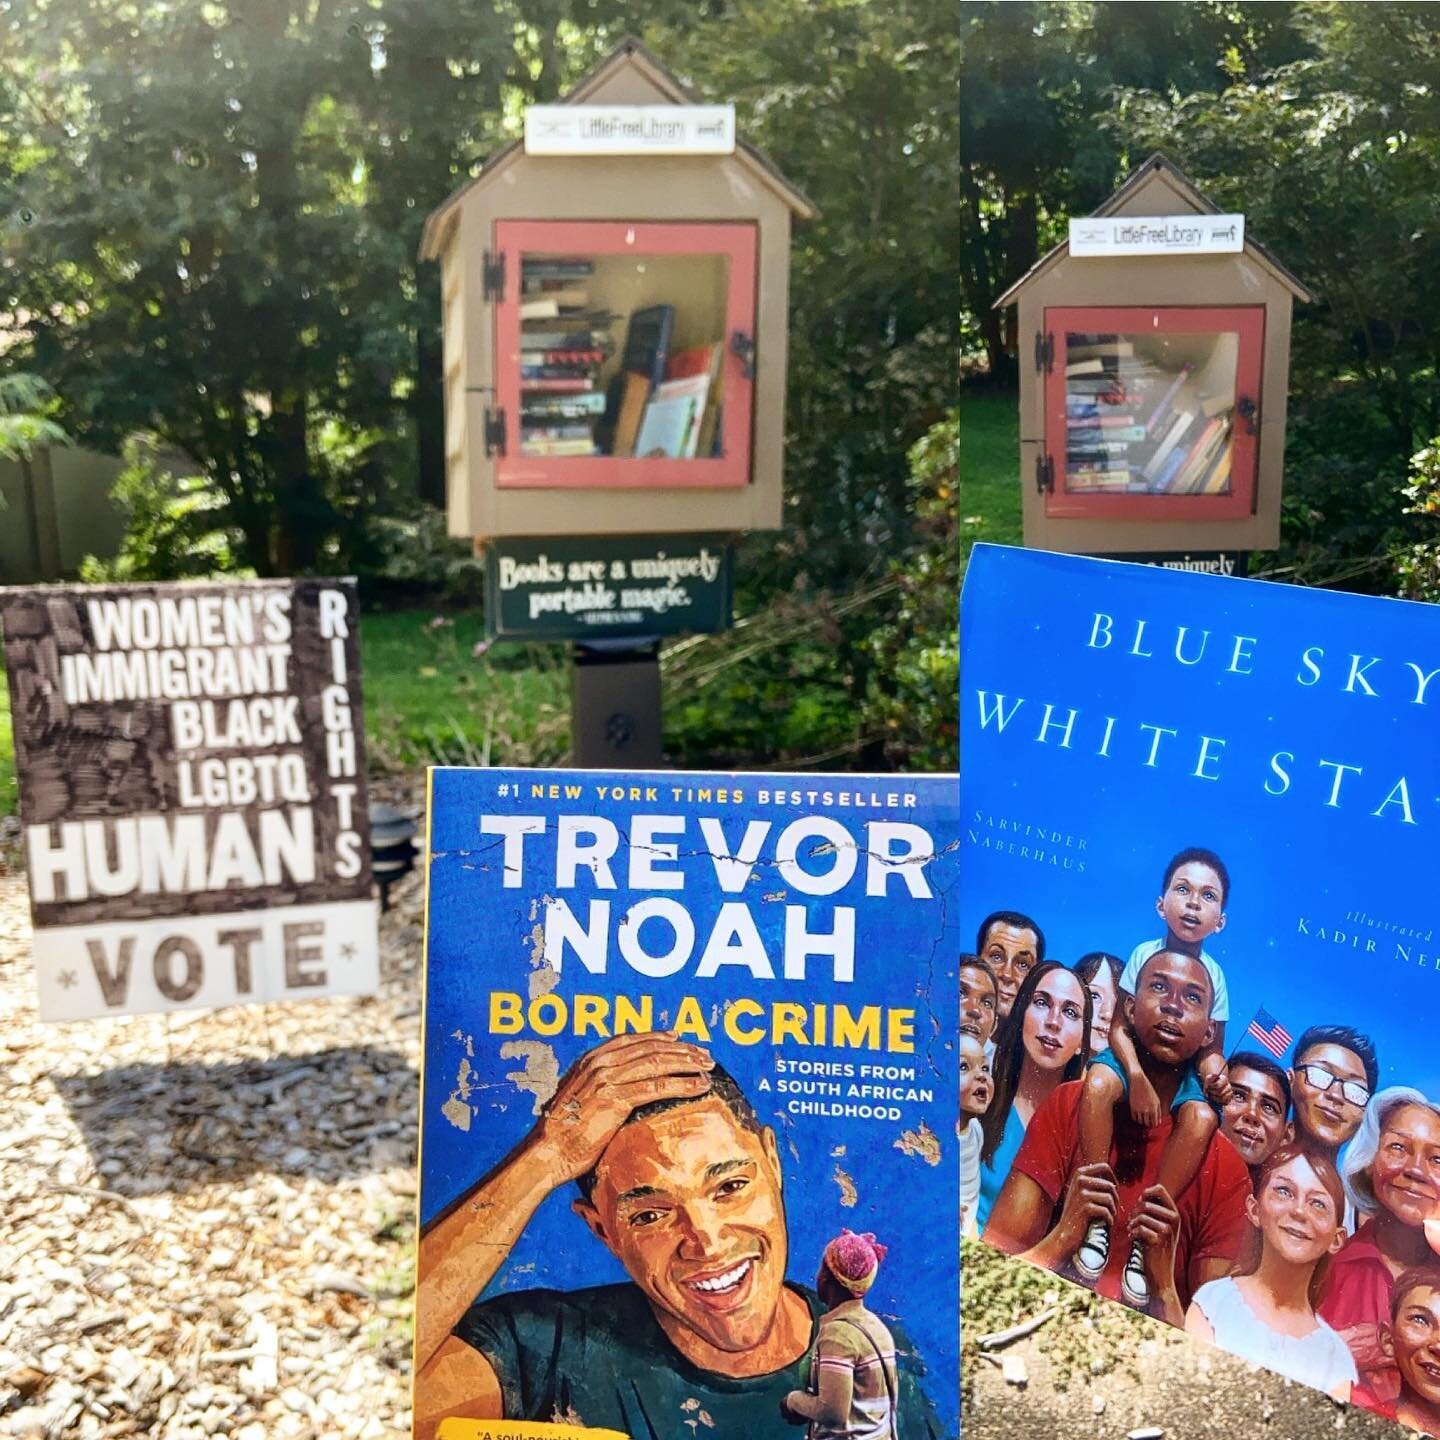 Happy #fridaydropoff 🎉📚!!

Anyone else dig this awesome #littlefreelibrary with such an important message? 🗳✊🏼

An exciting update for y&rsquo;all: as of today, we have reached our August book collection goal!! Our champions all over ATL and 🇺🇸